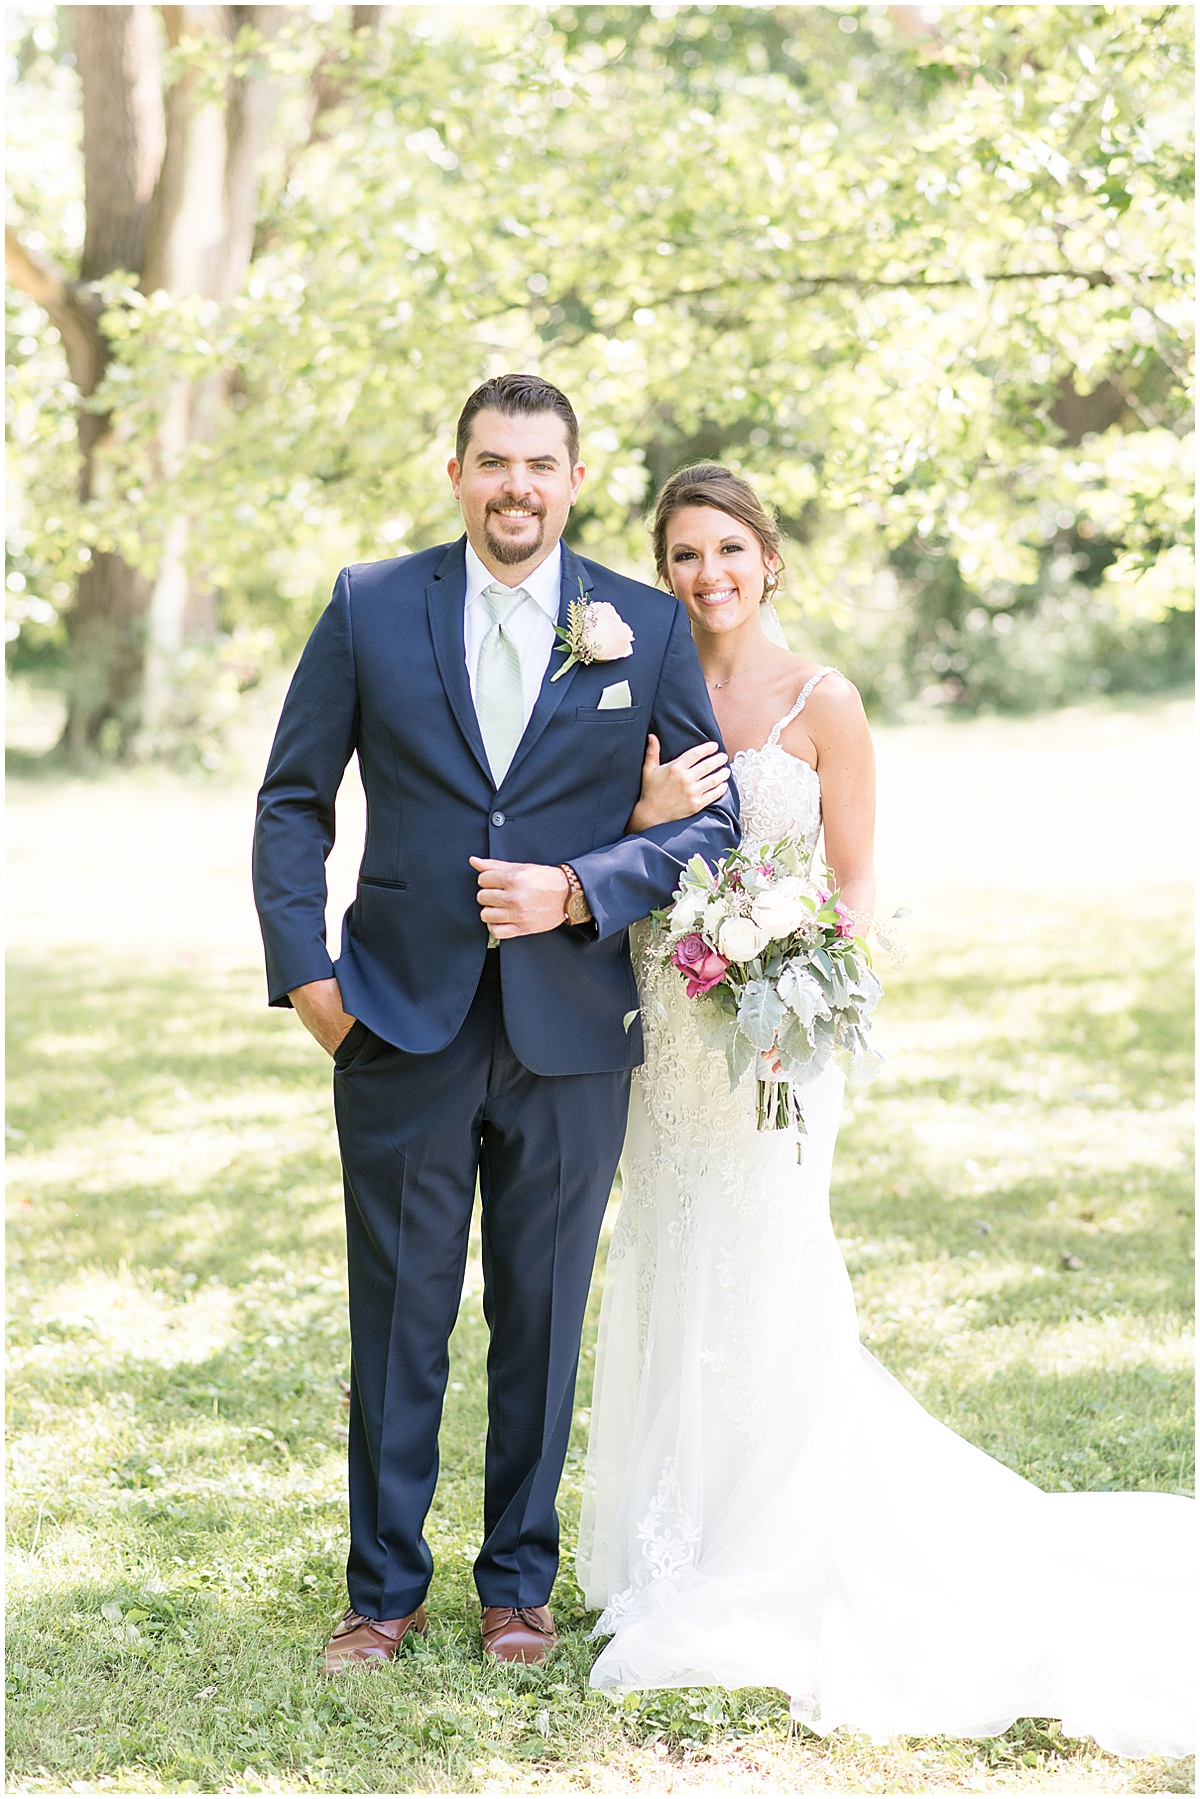 Bride and groom photos at Rensseler, Indiana wedding by Victoria Rayburn Photography